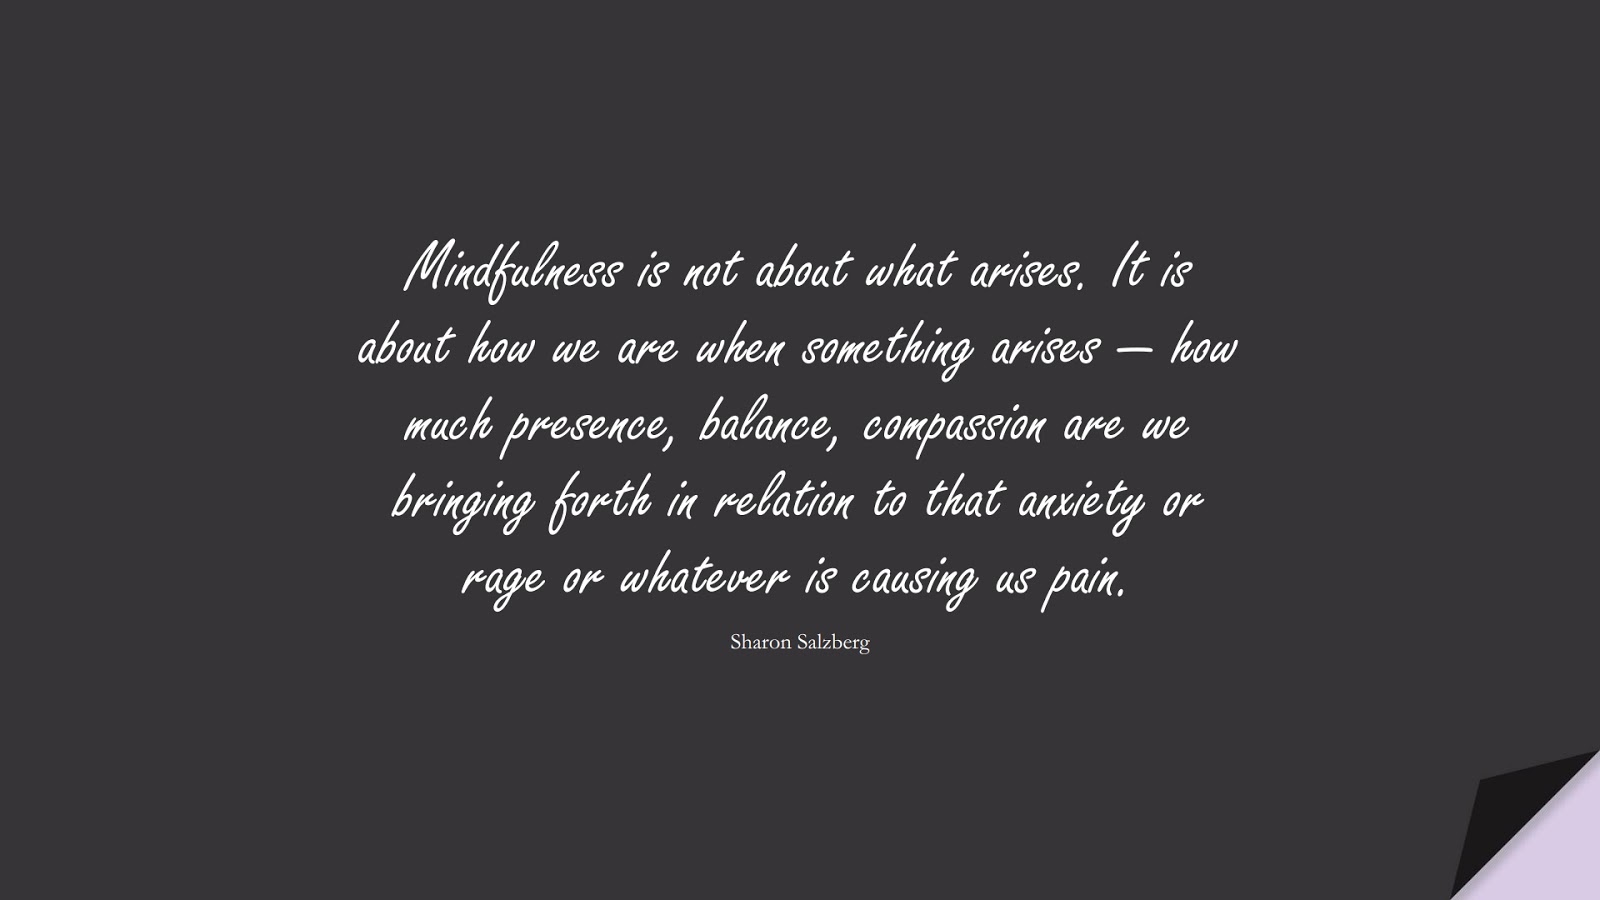 Mindfulness is not about what arises. It is about how we are when something arises — how much presence, balance, compassion are we bringing forth in relation to that anxiety or rage or whatever is causing us pain. (Sharon Salzberg);  #DepressionQuotes